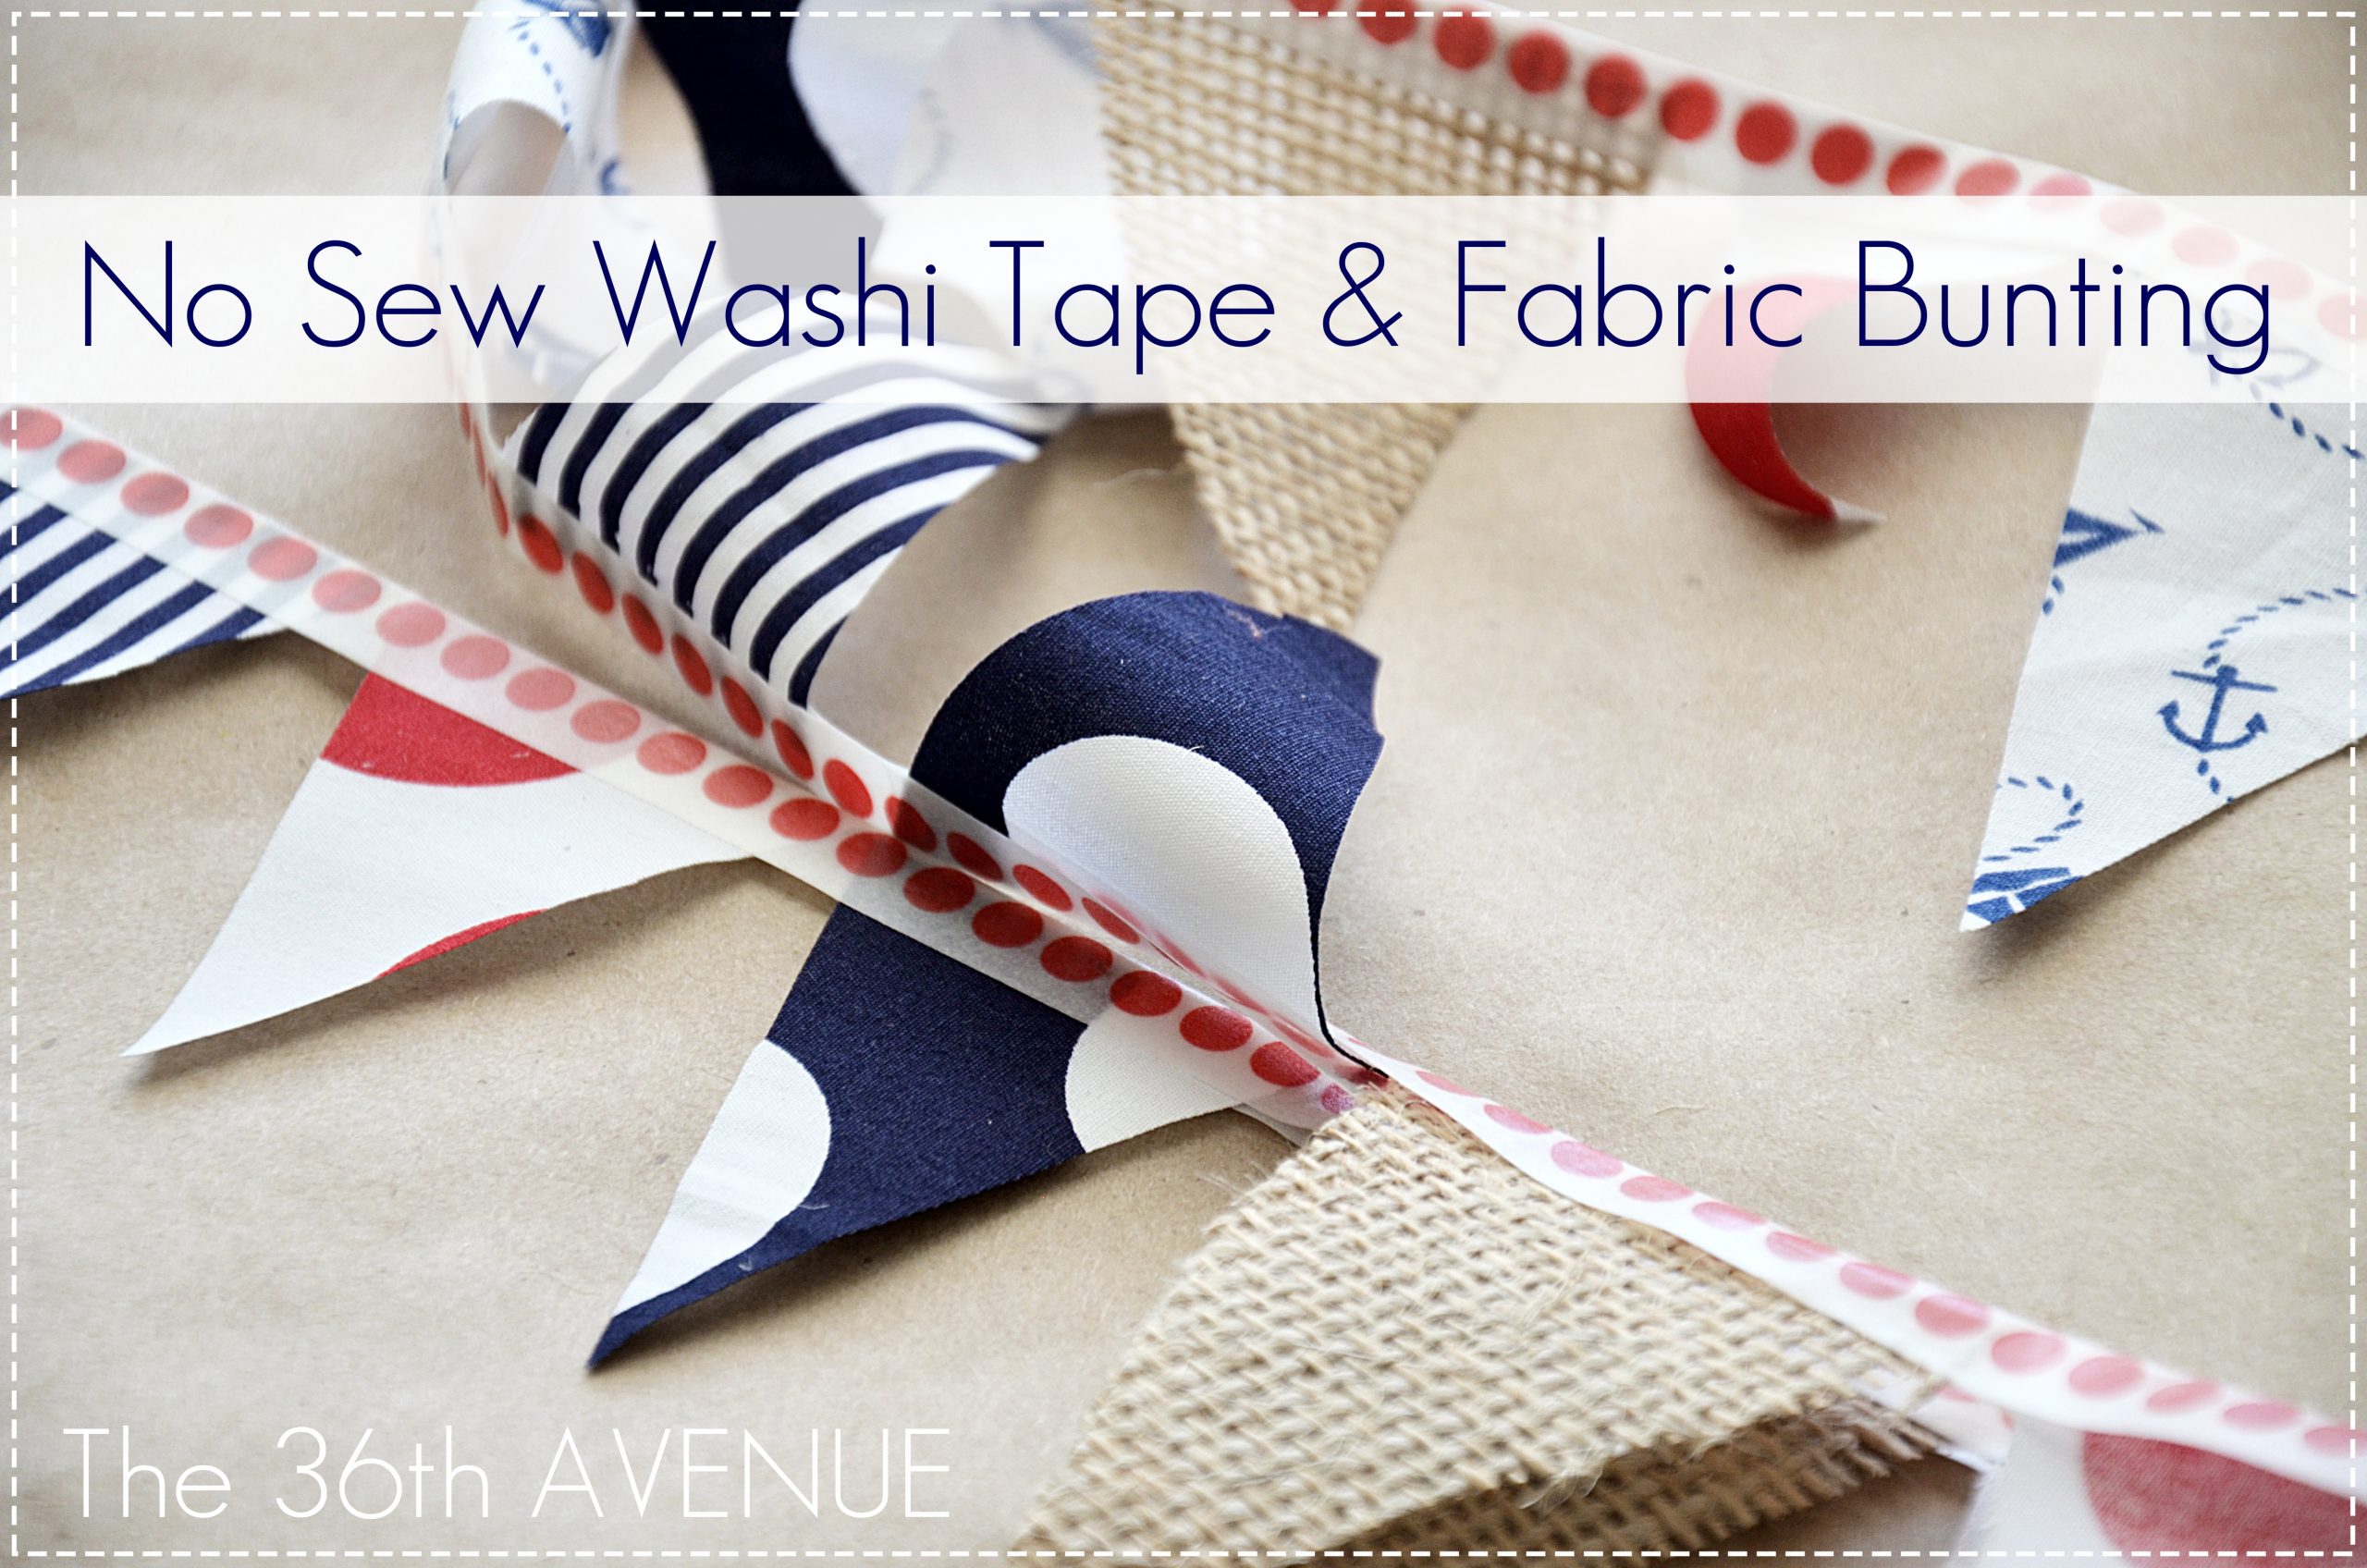 No Sew Fabric and Washi Tape Bunting